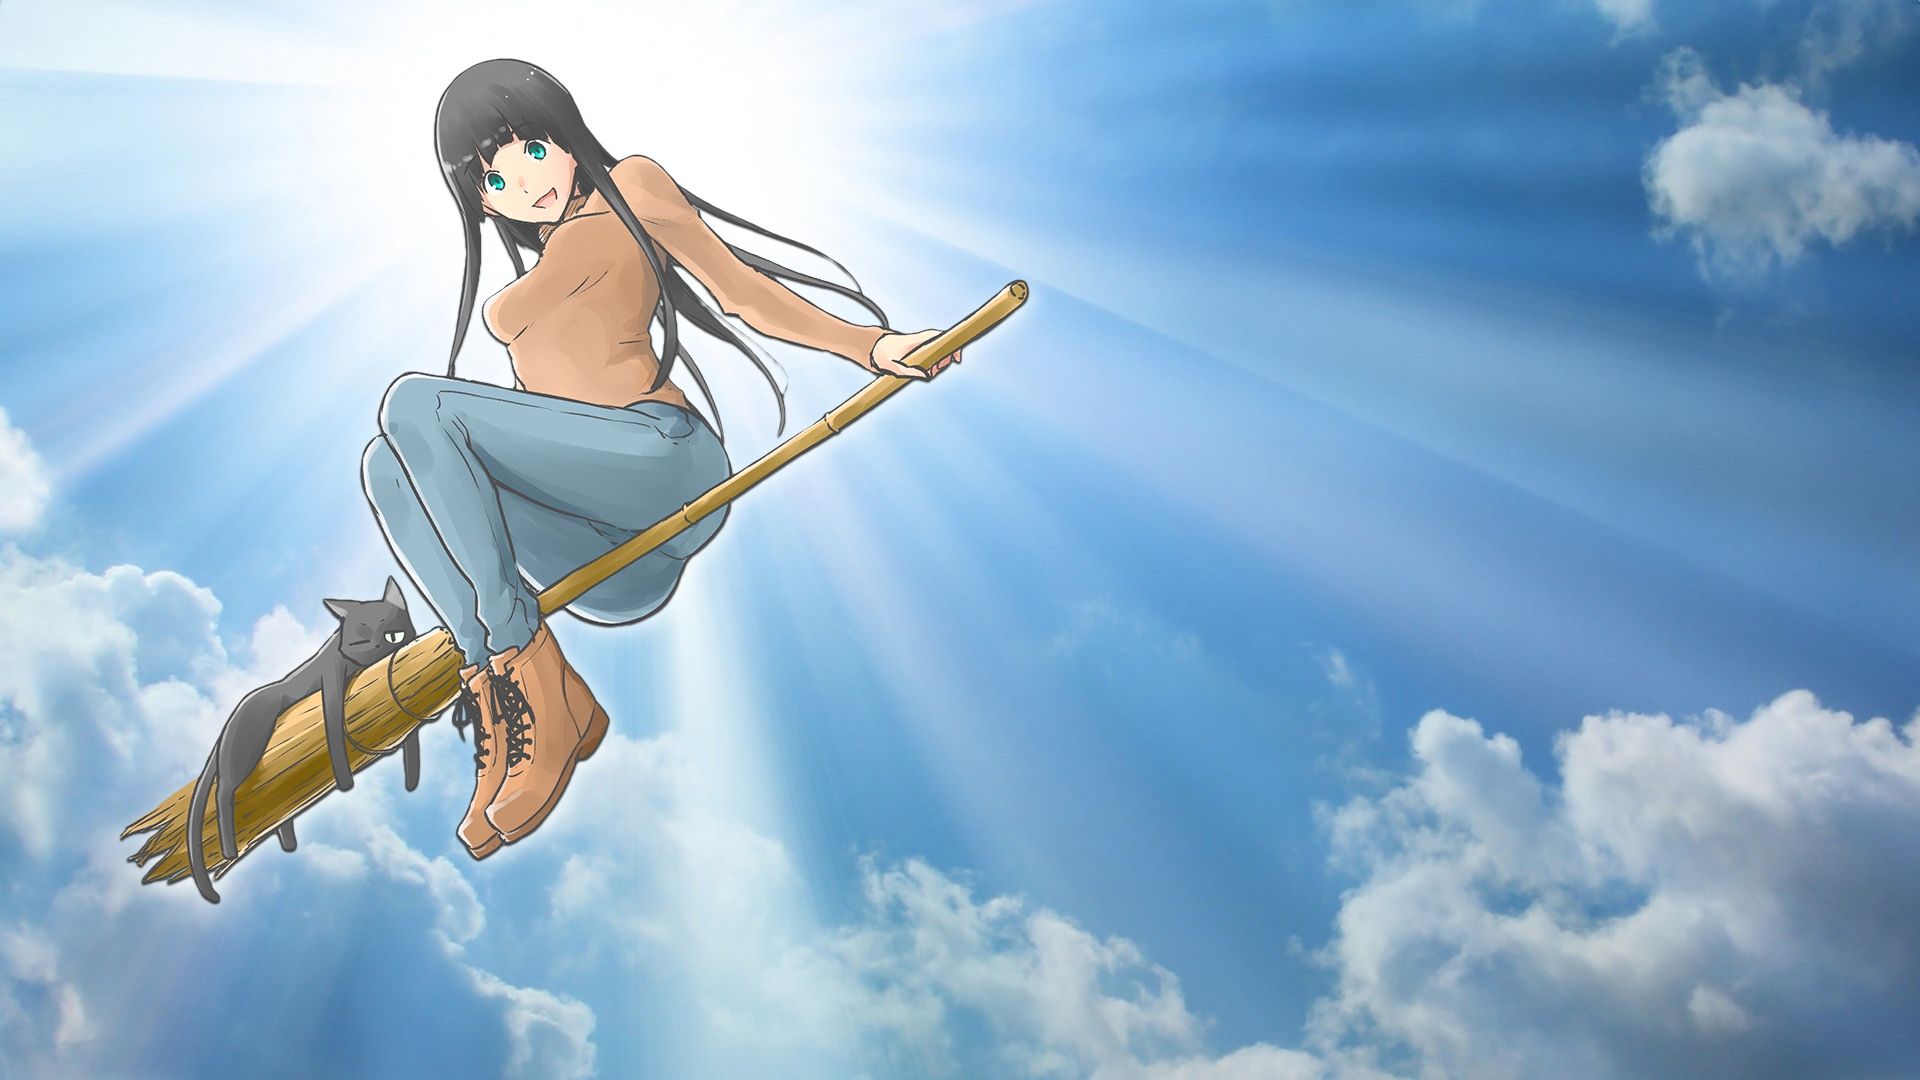 Flying Witch Wallpapers